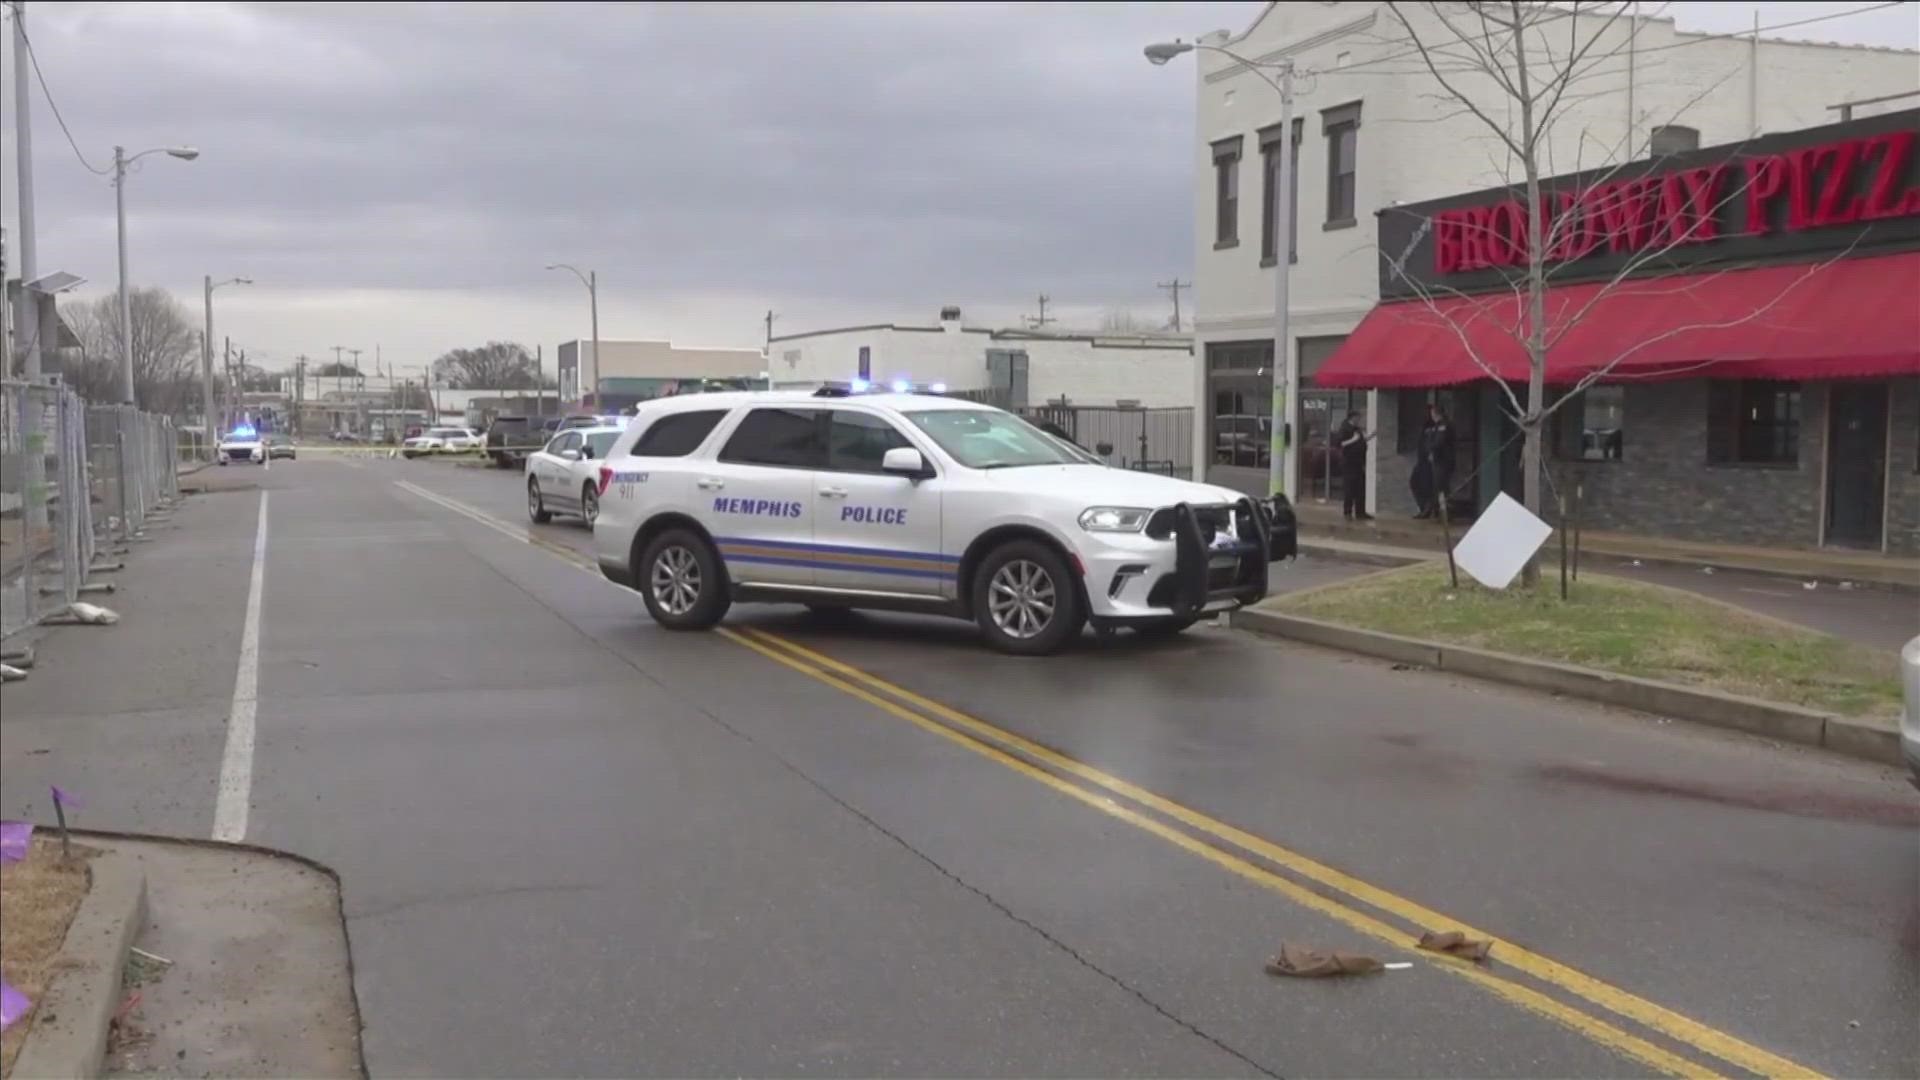 MPD officers were called to a shooting at Broadway Pizza in the 2500 block of Board Ave. just before 2 p.m. Tuesday.